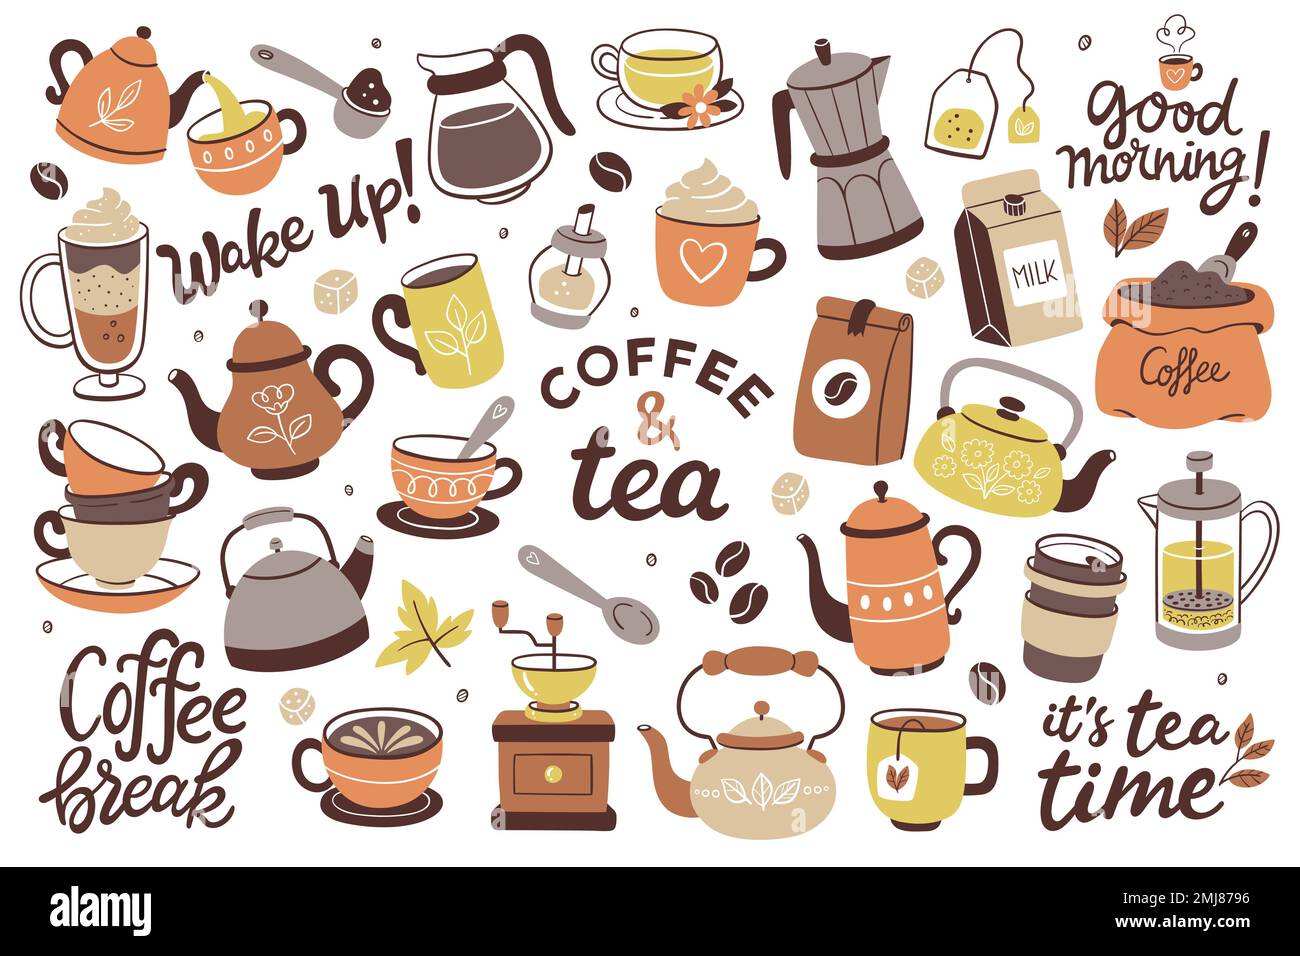 Collection of coffee and tea products. Colorful cliparts of teapots, cups, coffee, herbal teas... Isolated objects on a white background. Background t Stock Vector